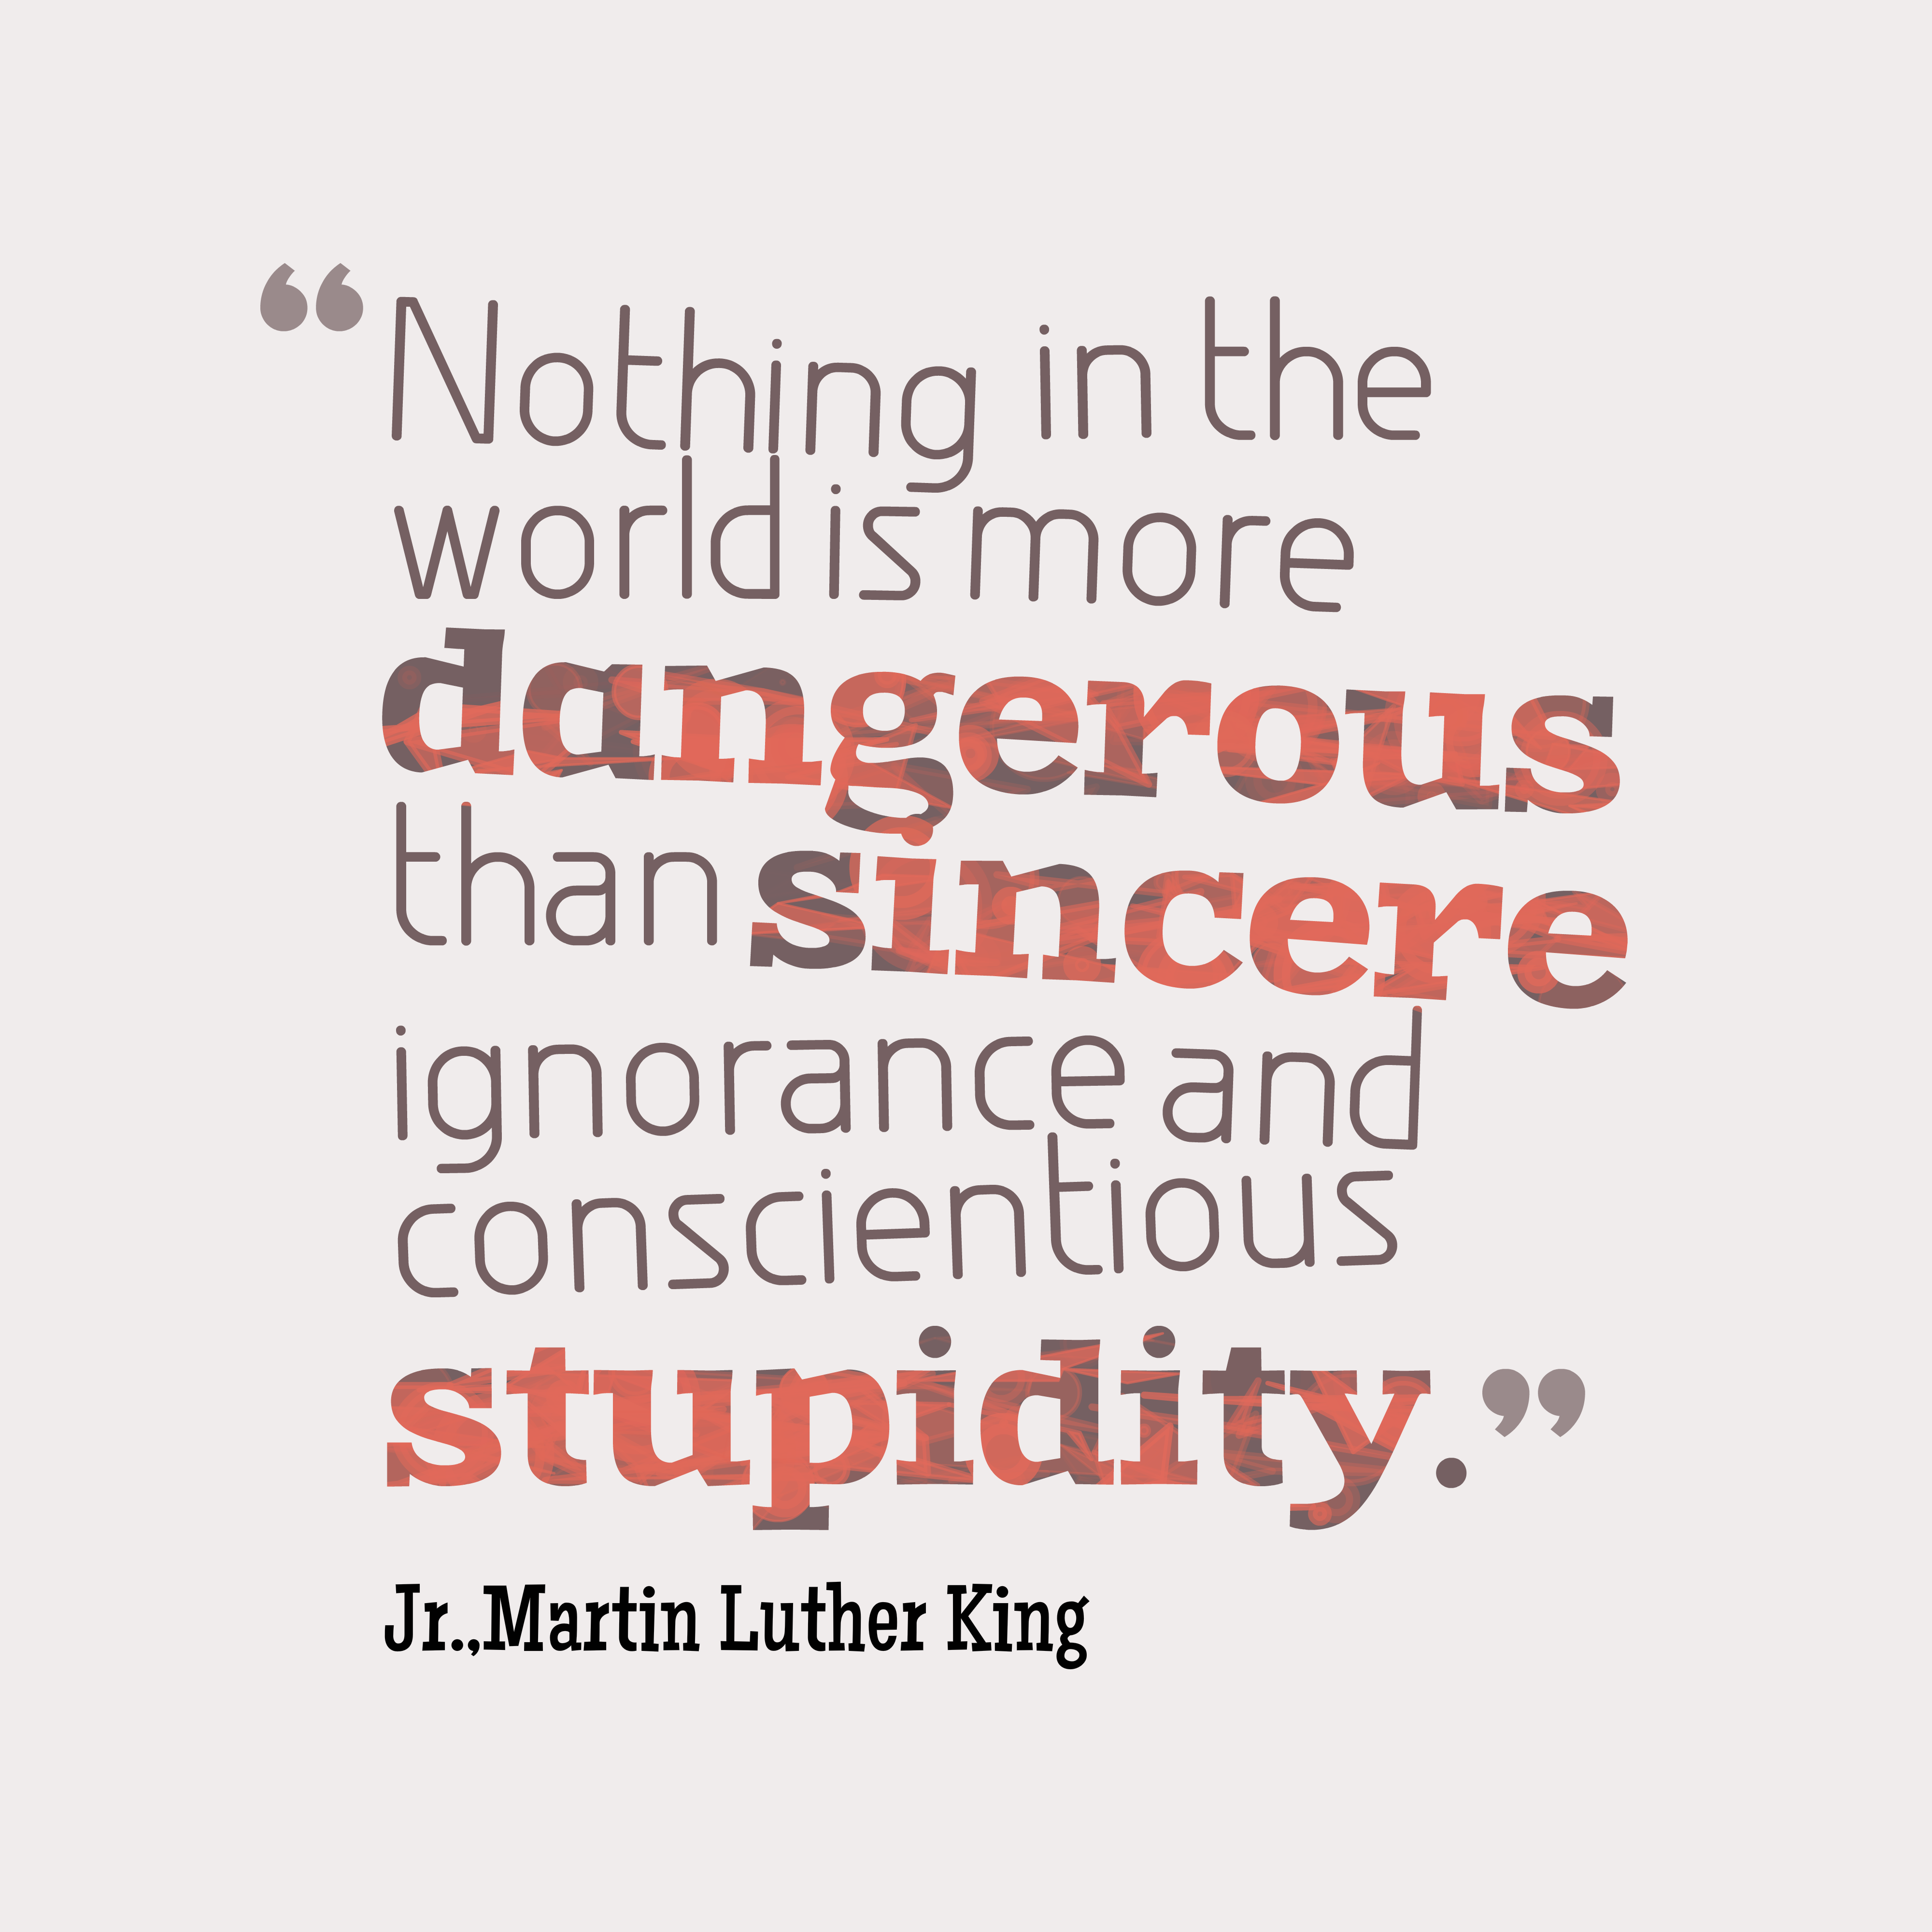 Nothing in all the world is more dangerous than sincere ignorance and conscientious stupidity. Martin Luther King, Jr.